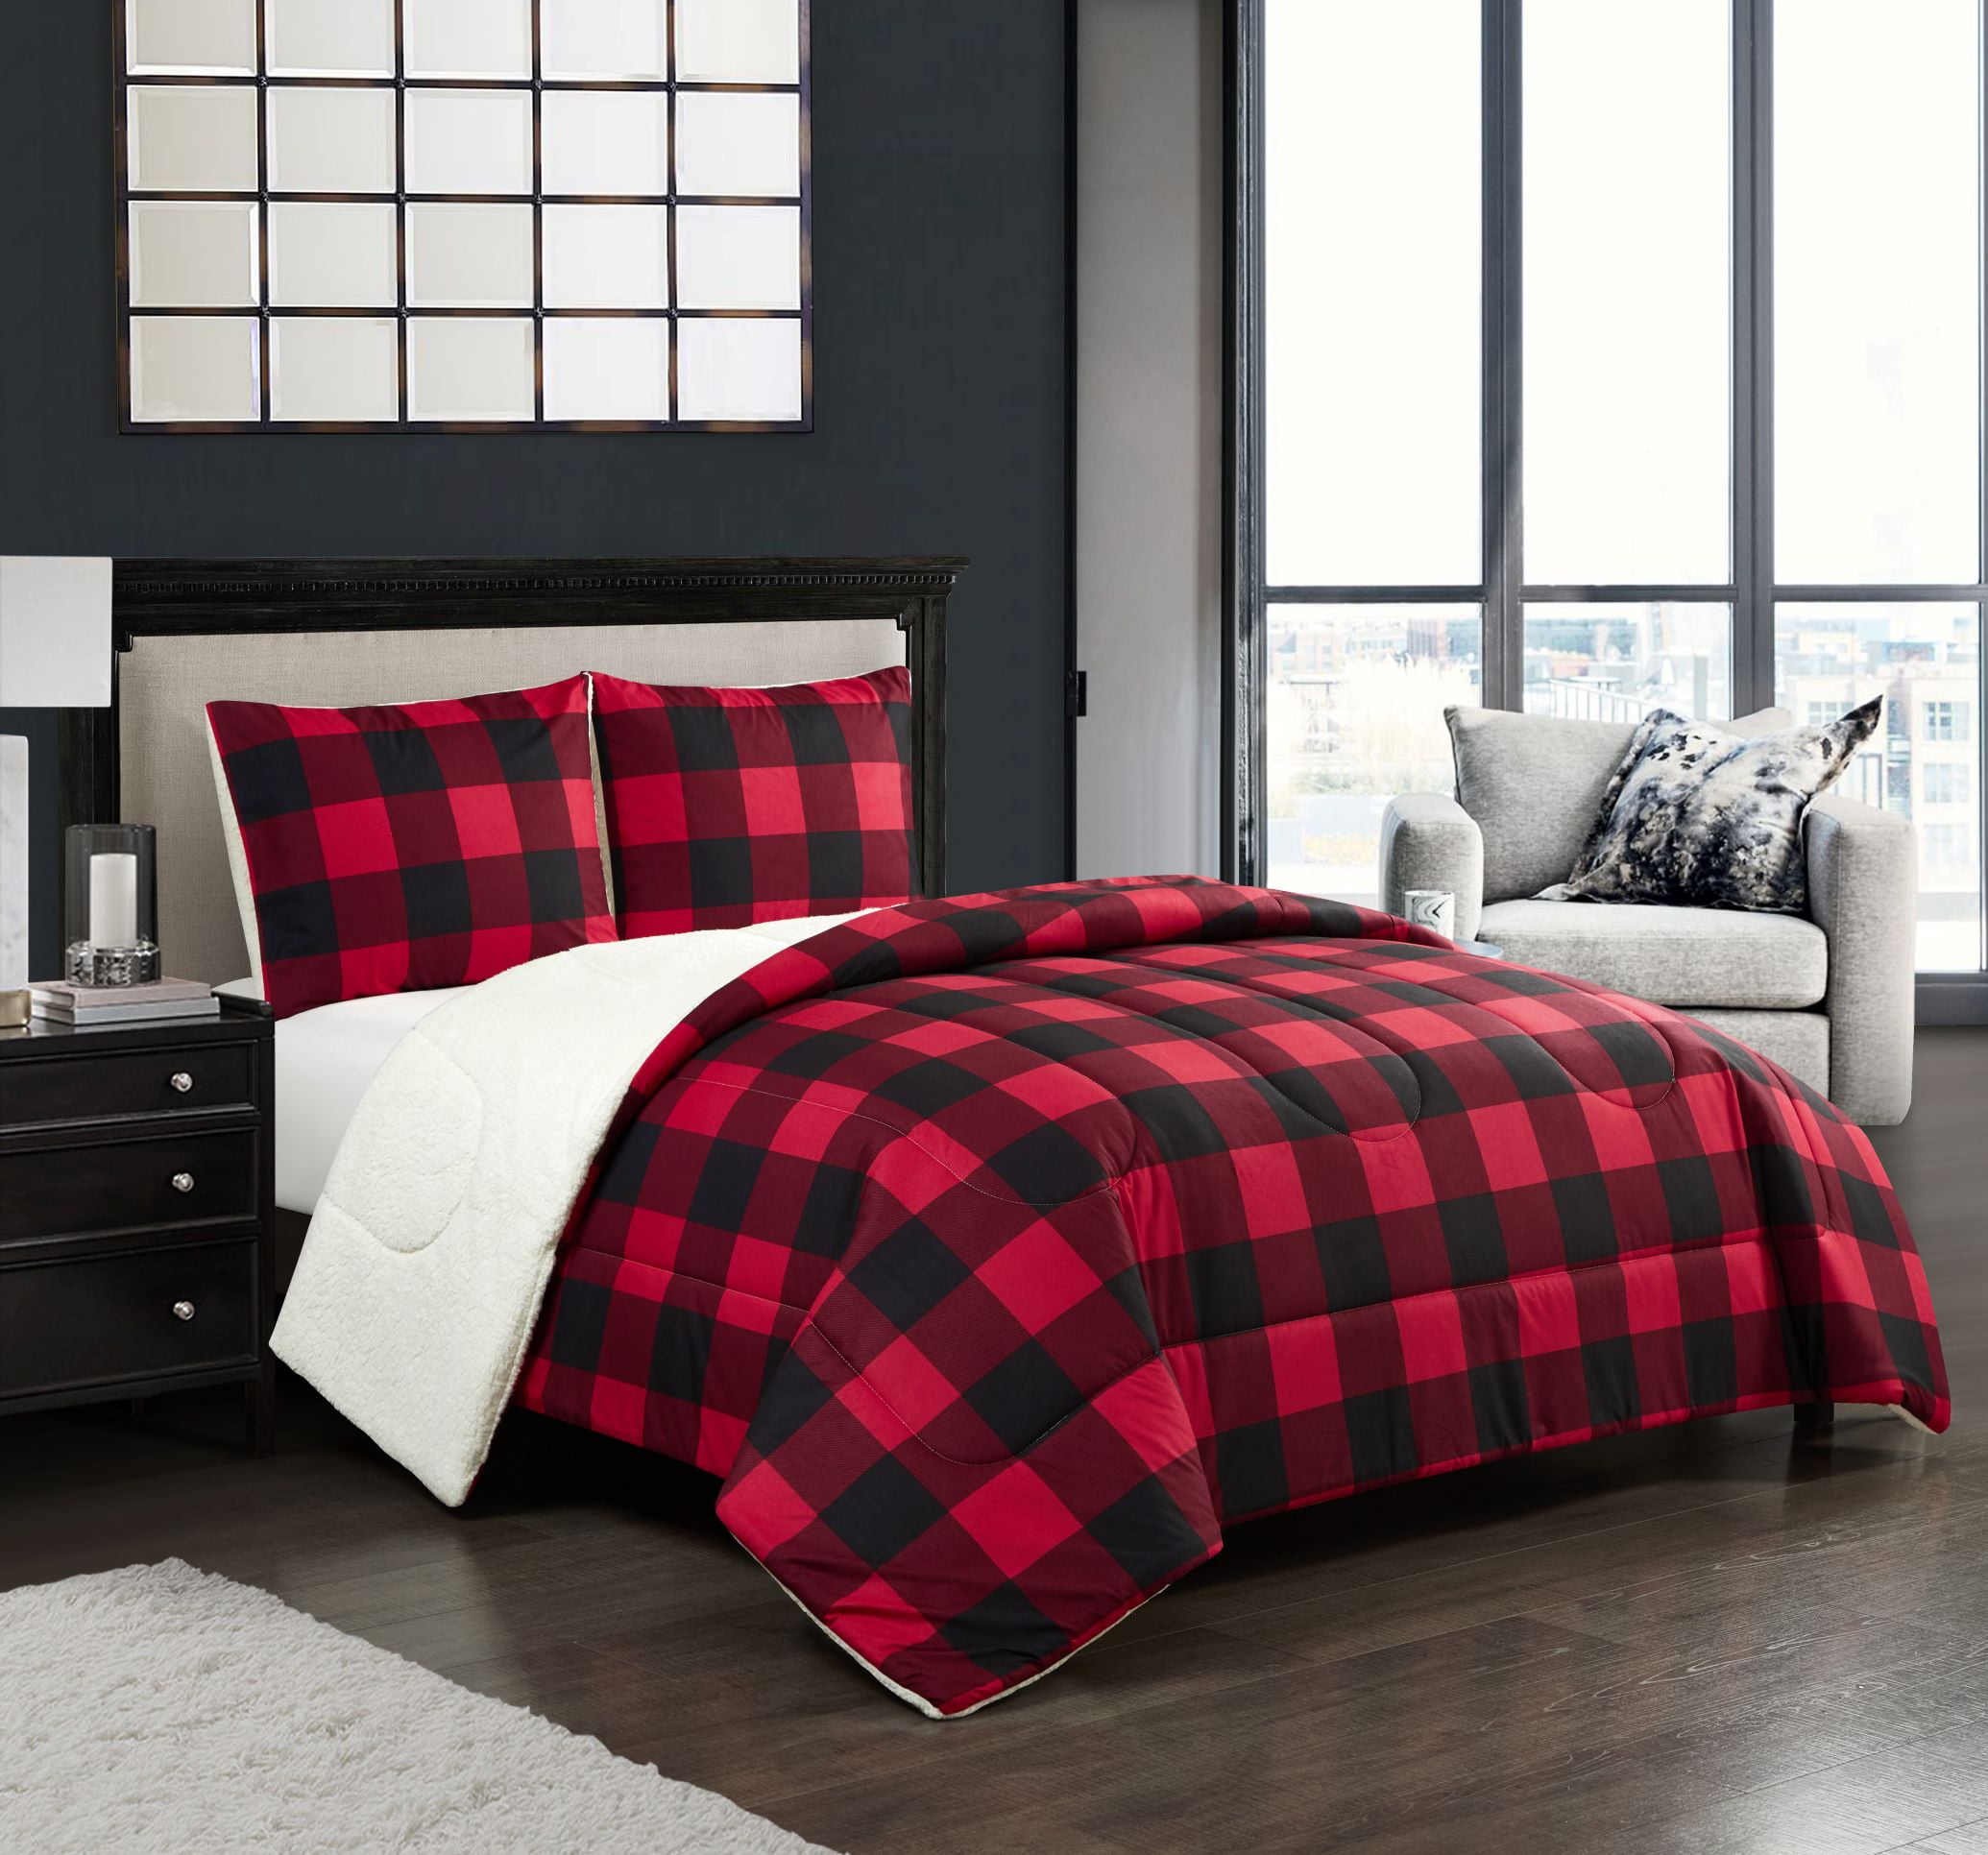 Flannel Sherpa Bed Blankets Full Queen, Red Flannel Duvet Cover Queen